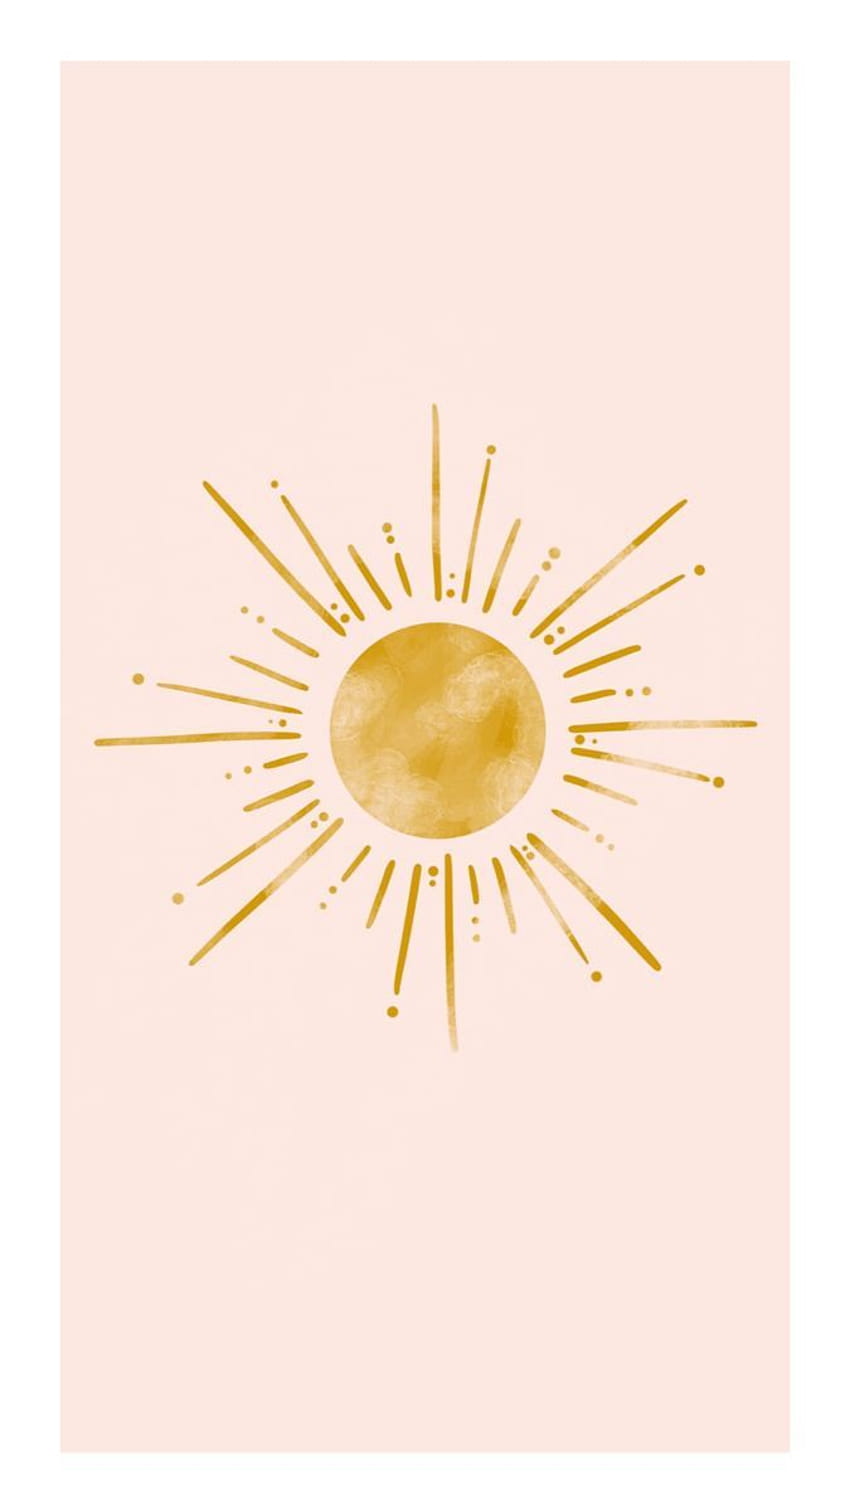 Set Of Different Hand Drawn Sun Sketch, Vector Illustration, 55% OFF